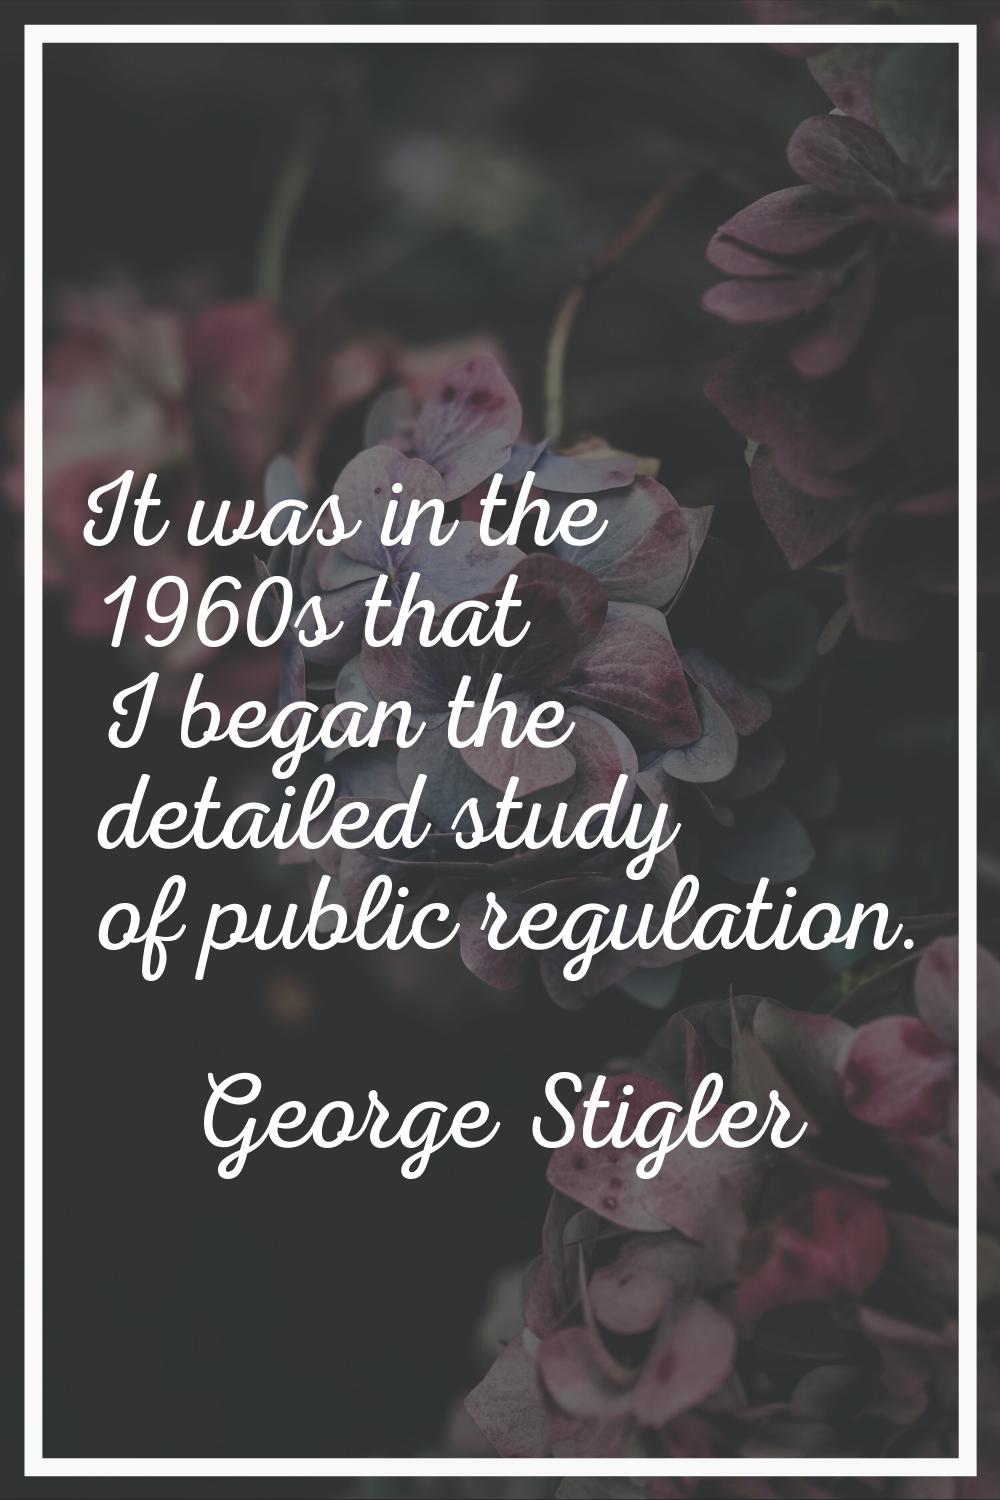 It was in the 1960s that I began the detailed study of public regulation.